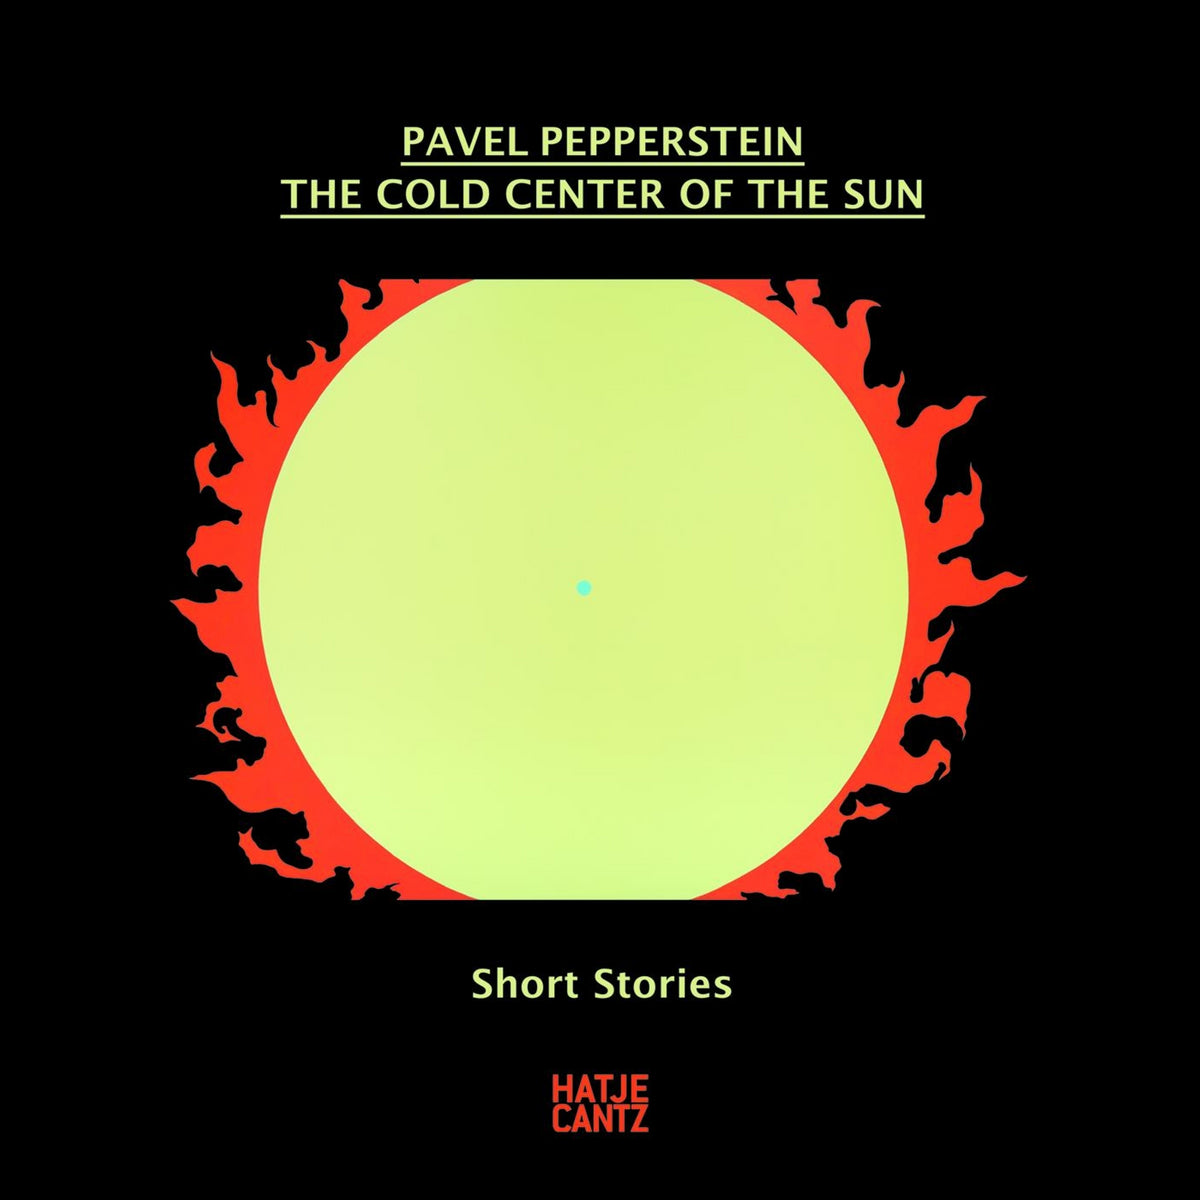 Coverbild Pavel Pepperstein. The Cold Center of the Sun